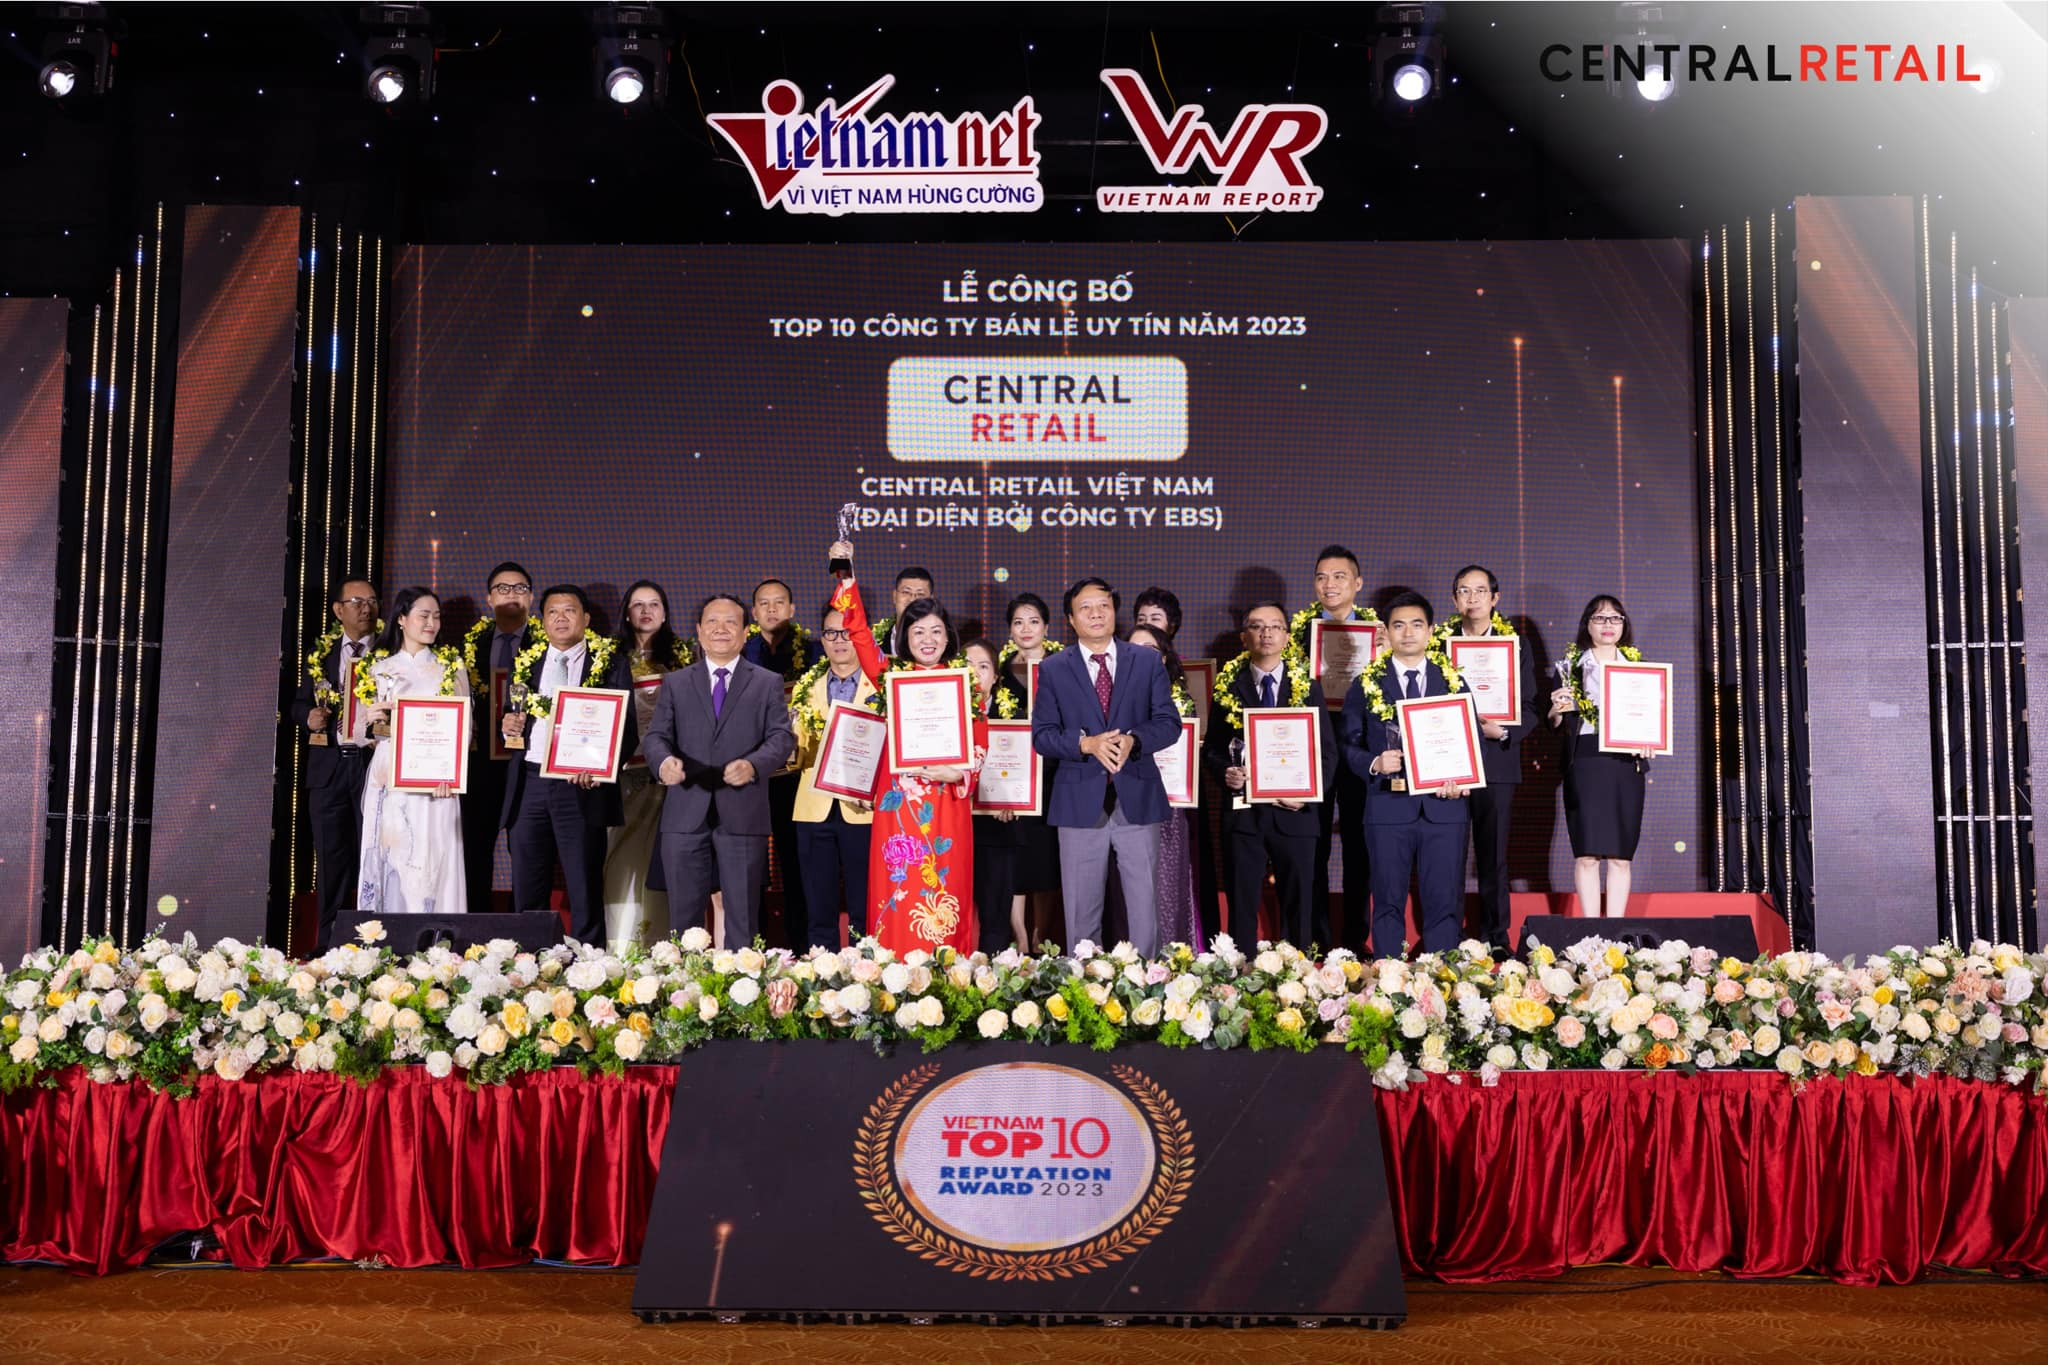 Central Retail in Vietnam was honored as the champion of the Top 10 prestigious companies in the Retail industry 2023